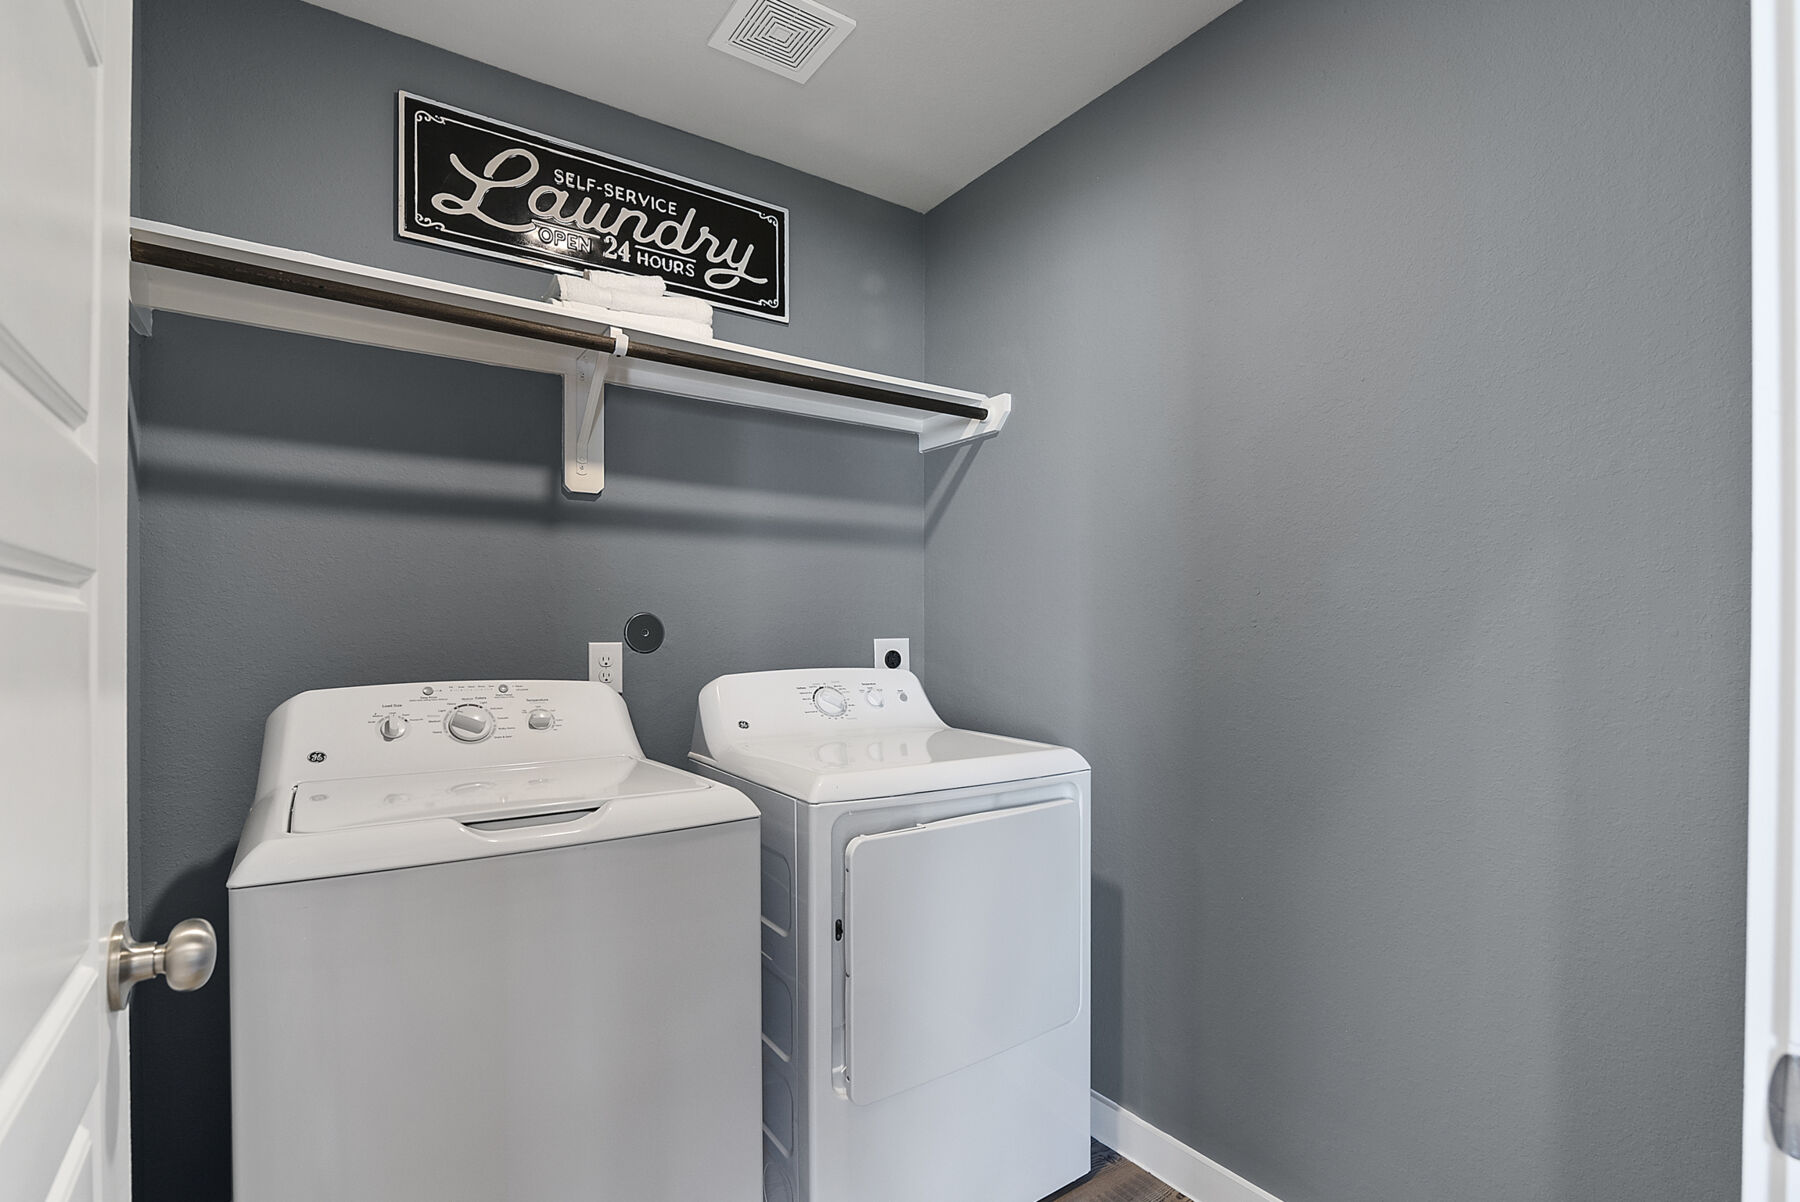 Magnolia Construction - Having storage in a laundry room is